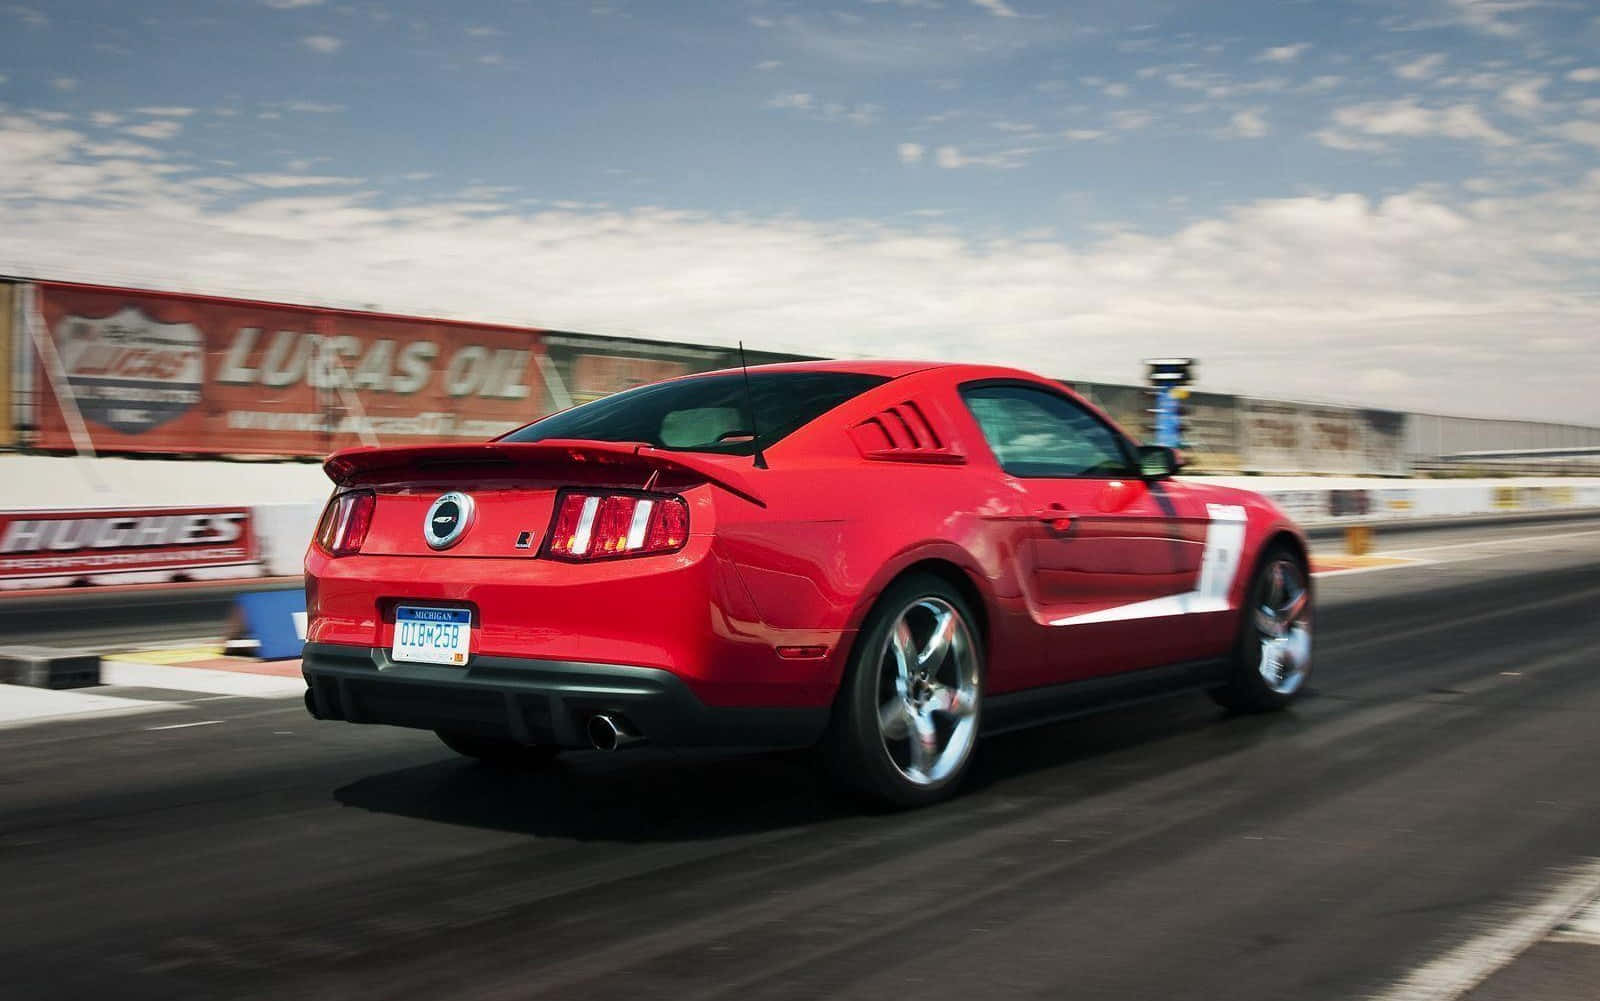 Powerful Ford Mustang Roush in Action Wallpaper